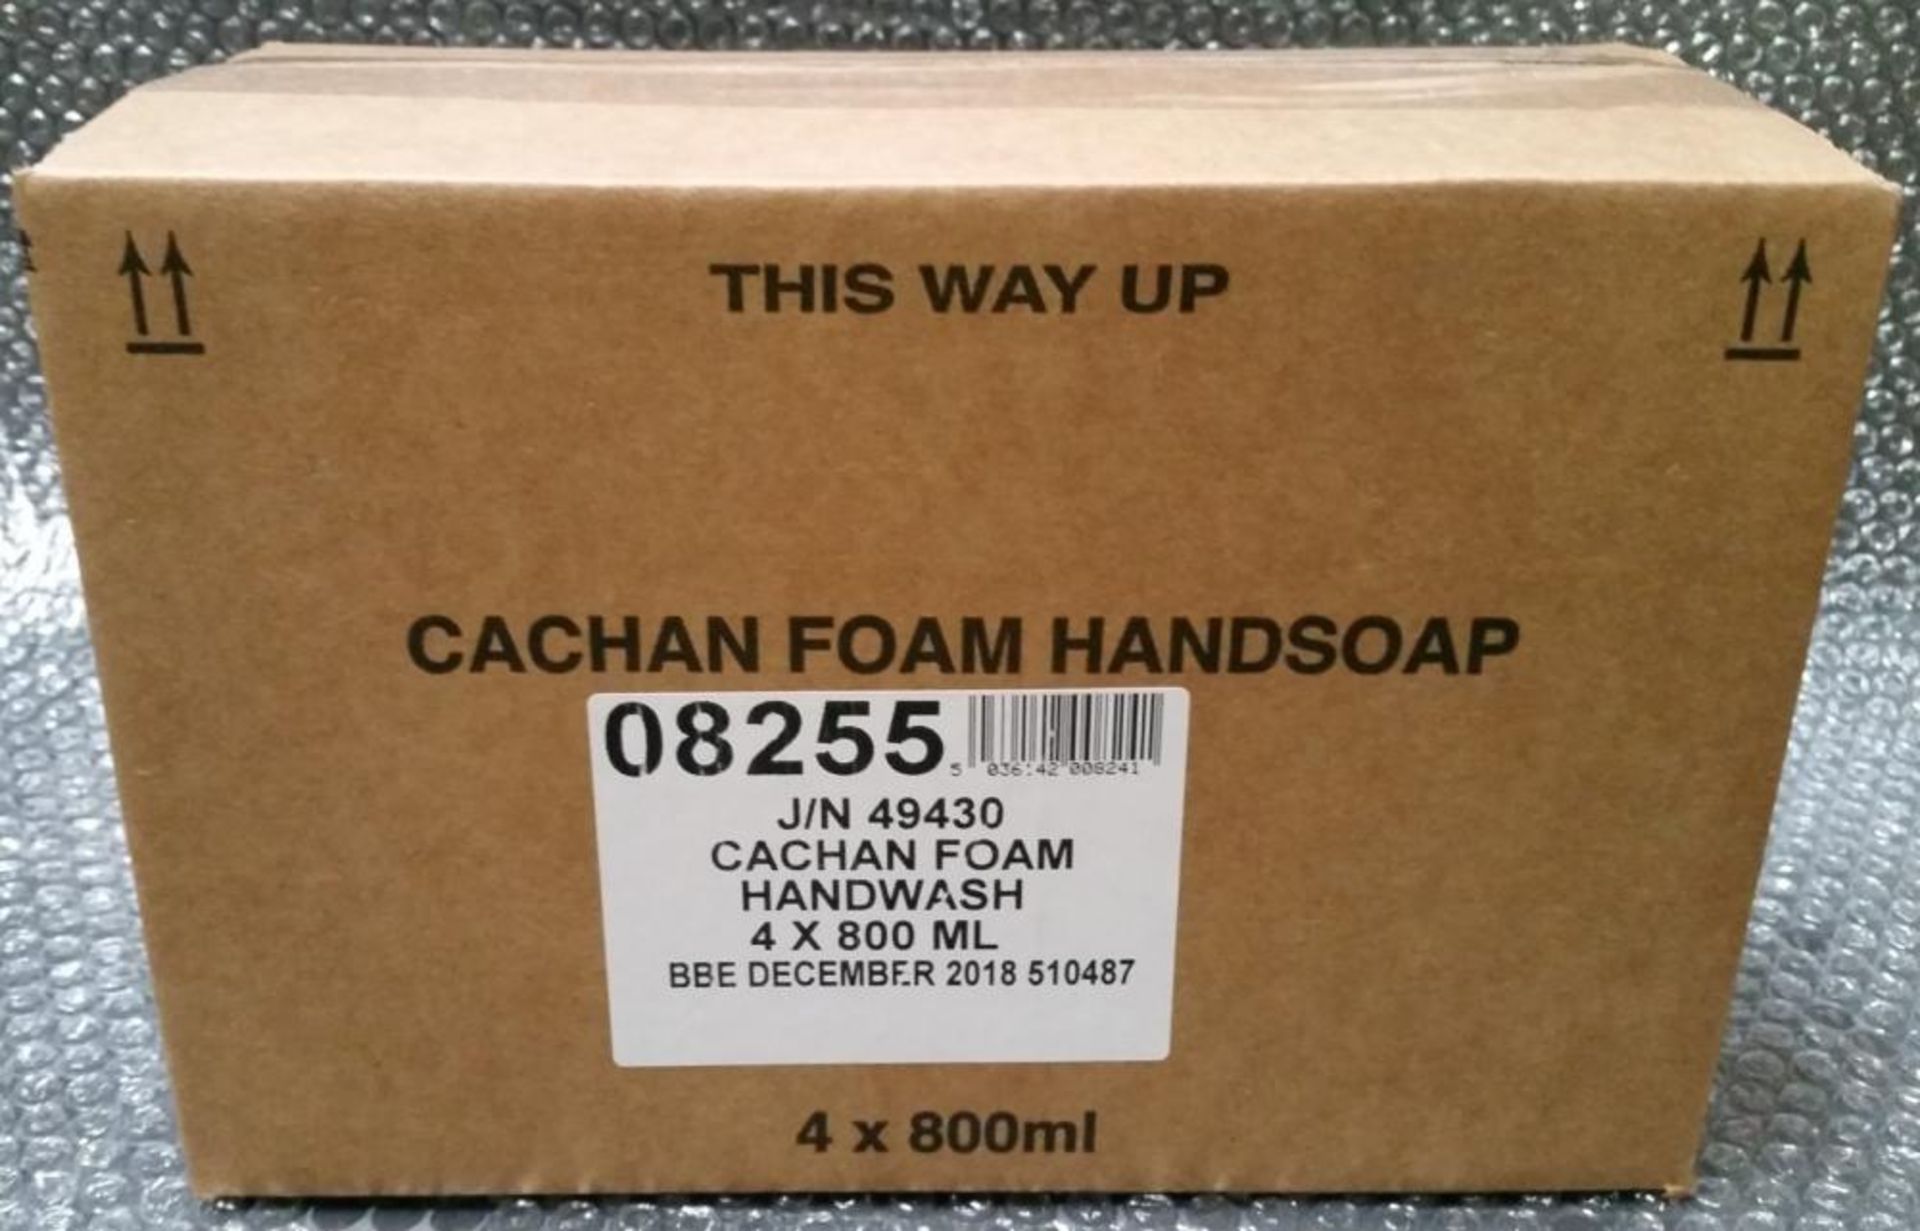 24 x Cachan Foam 800ml Handwash - Suitable For Foaming Dispnesers - Expiry December 2018 - Includes - Image 2 of 5